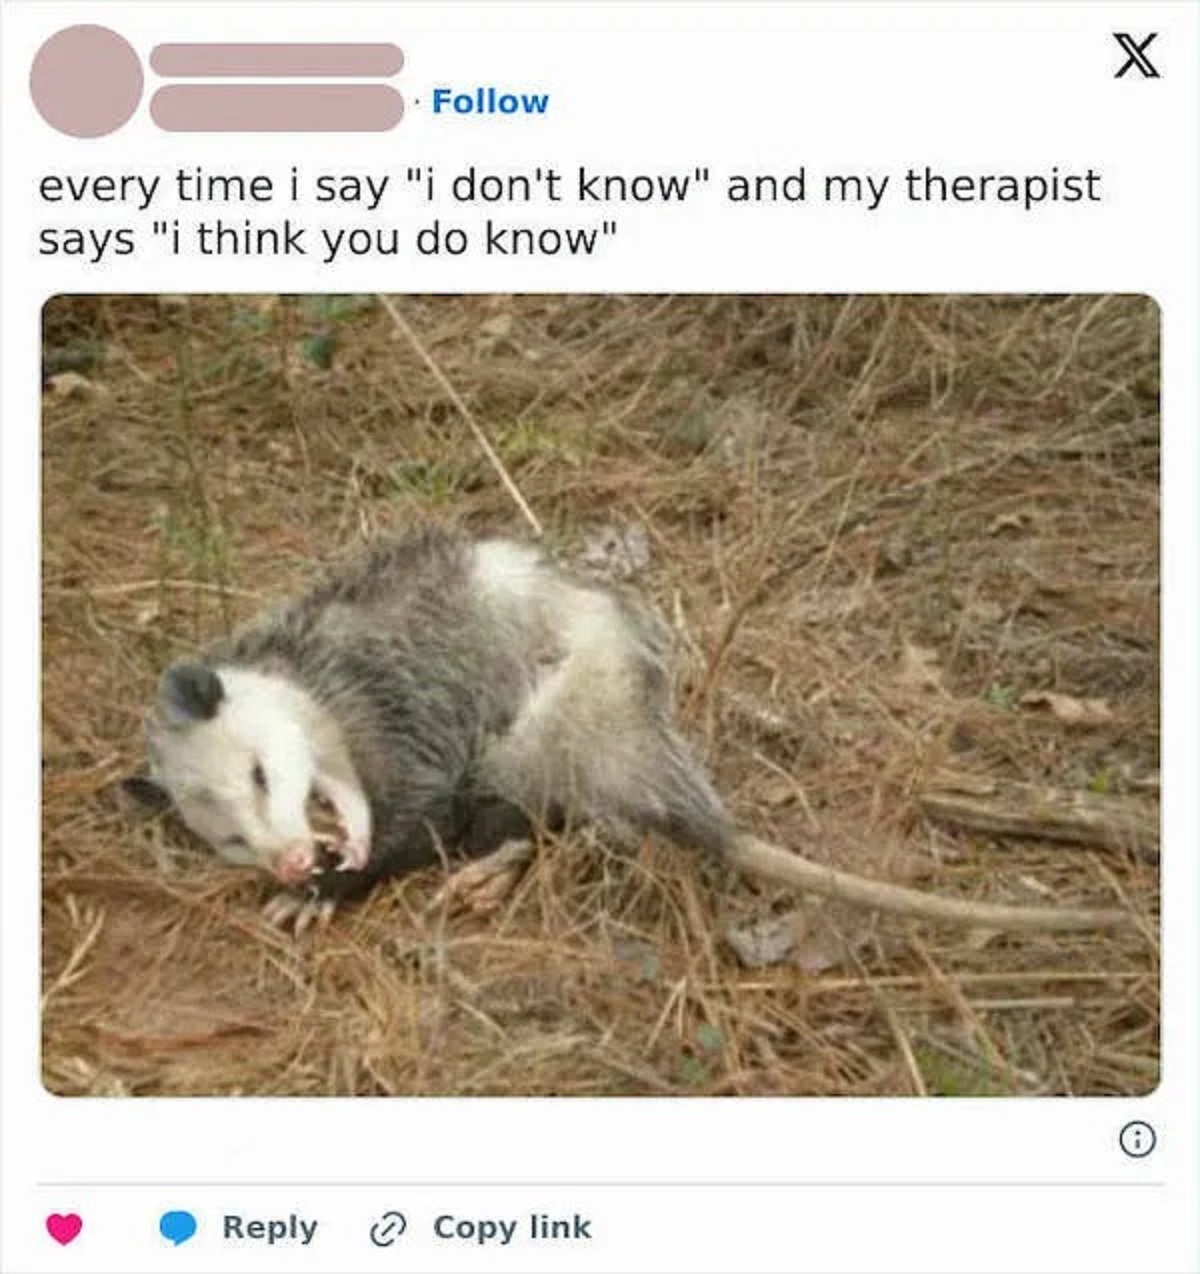 common opossum - every time i say "i don't know" and my therapist says "i think you do know" Copy link X